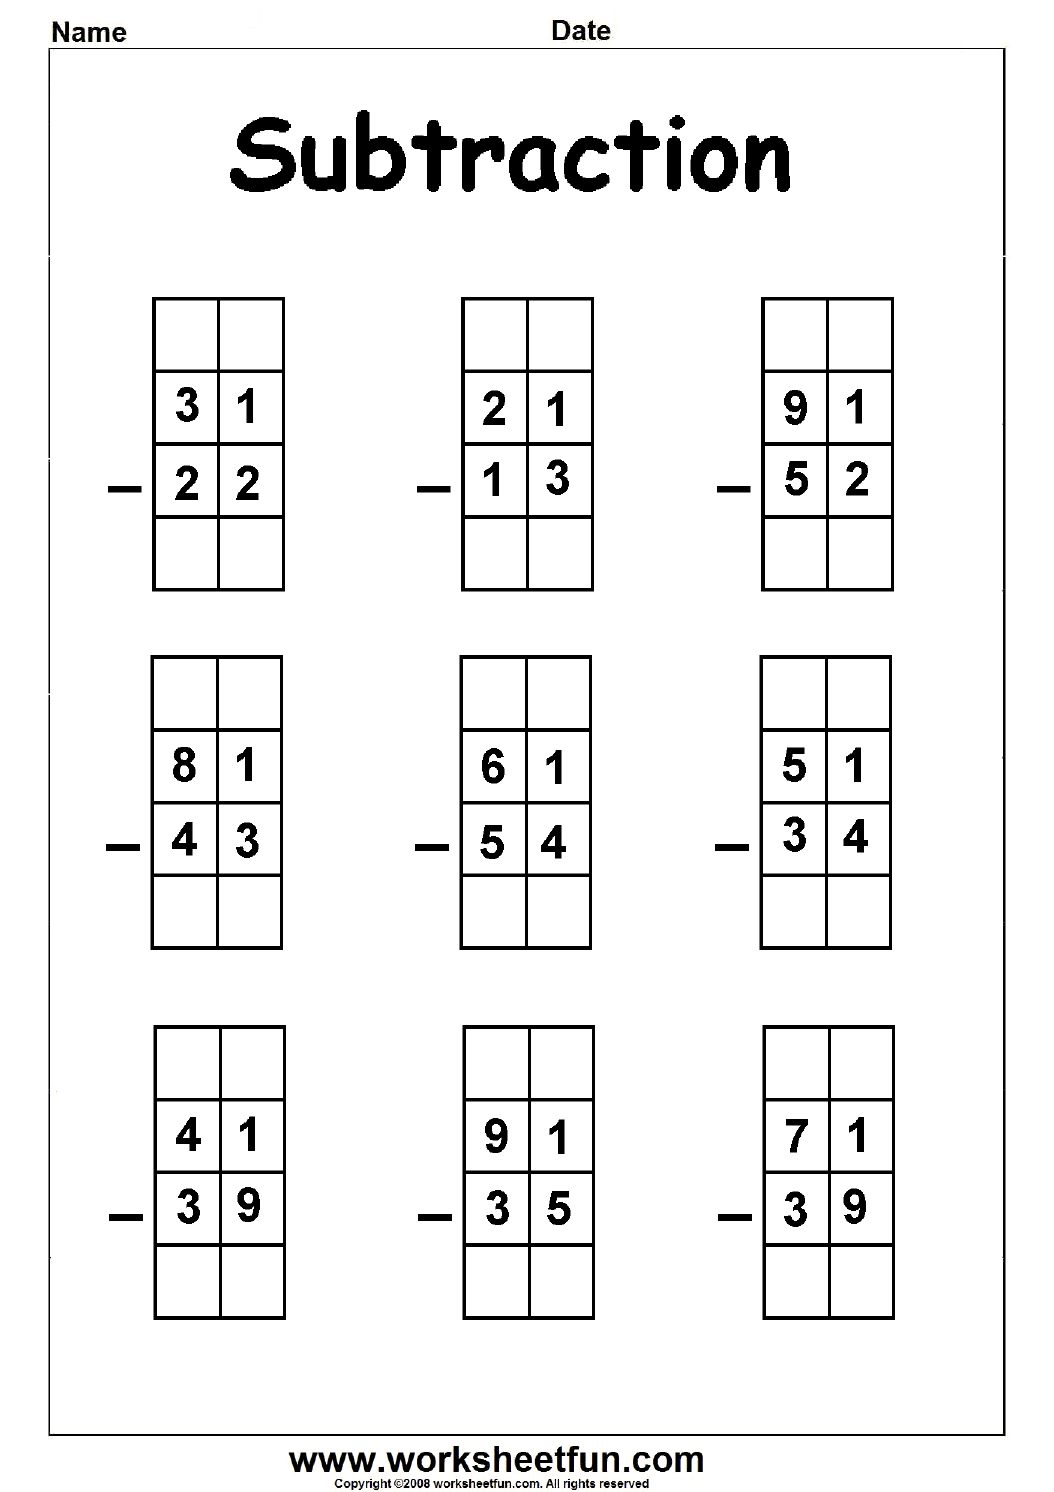 12-best-images-of-subtraction-cut-and-paste-worksheets-cut-and-paste